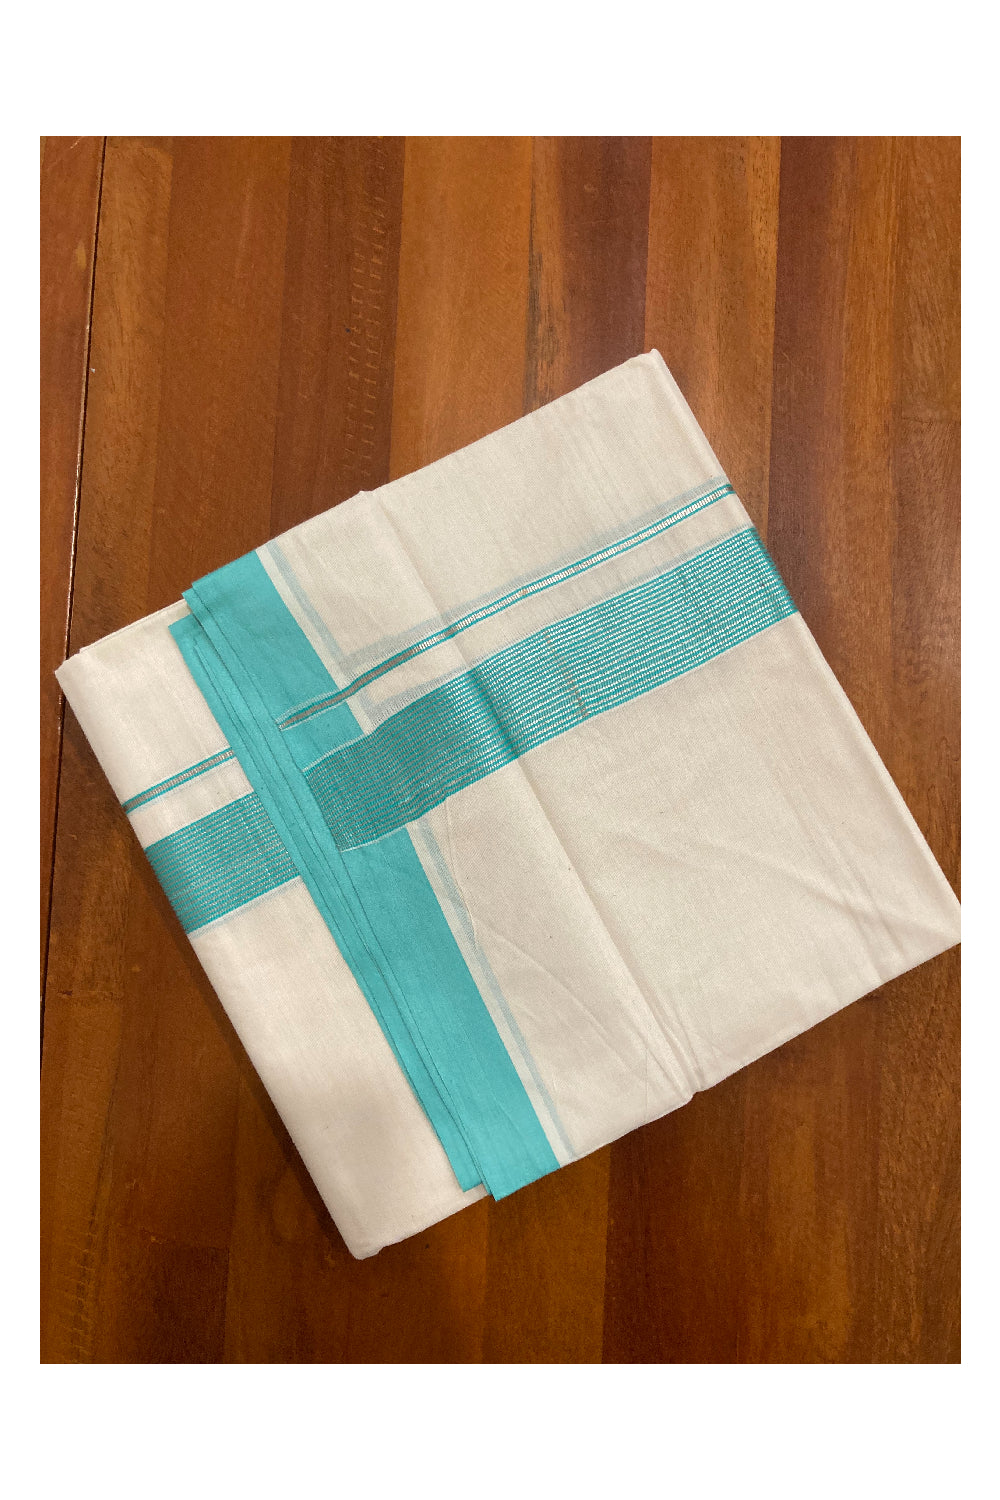 Off White Kerala Double Mundu with Silver Kasavu and Turquoise Line Border (South Indian Dhoti)